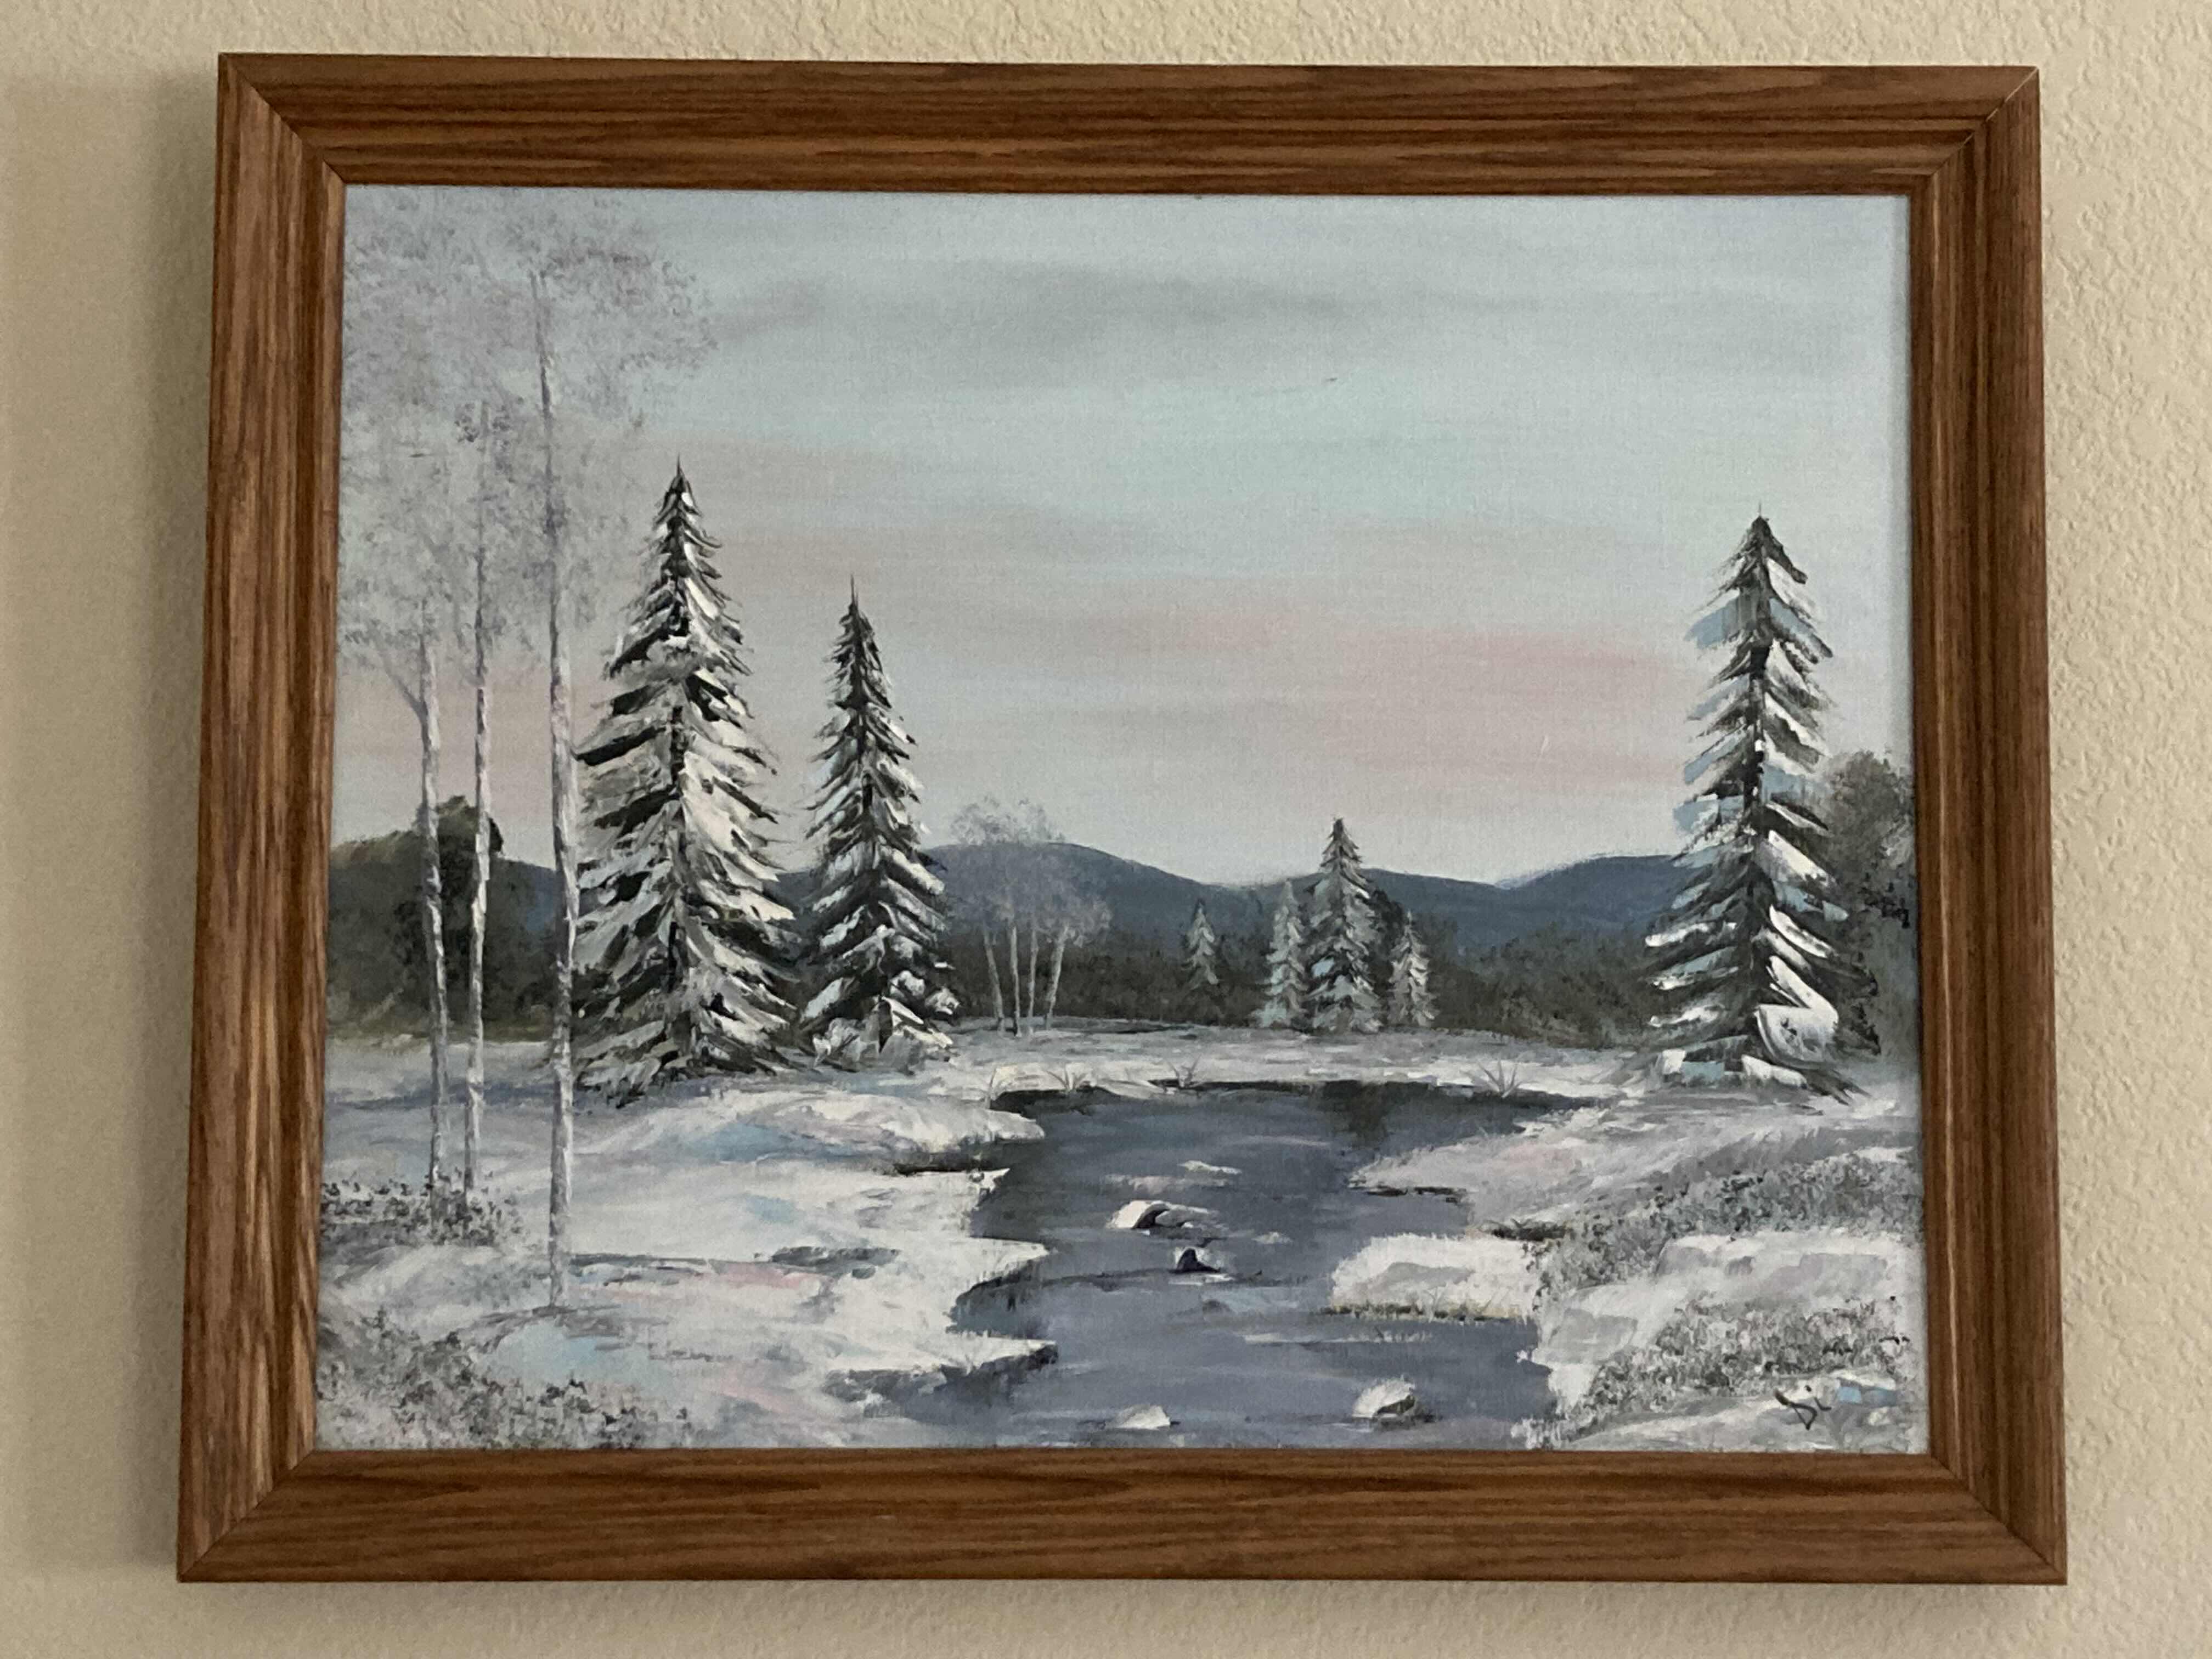 Photo 1 of SNOWY FOREST PAINTED FRAMED CANVAS ARTWORK SIGNED BY ARTIST 22.5” X 18.5”